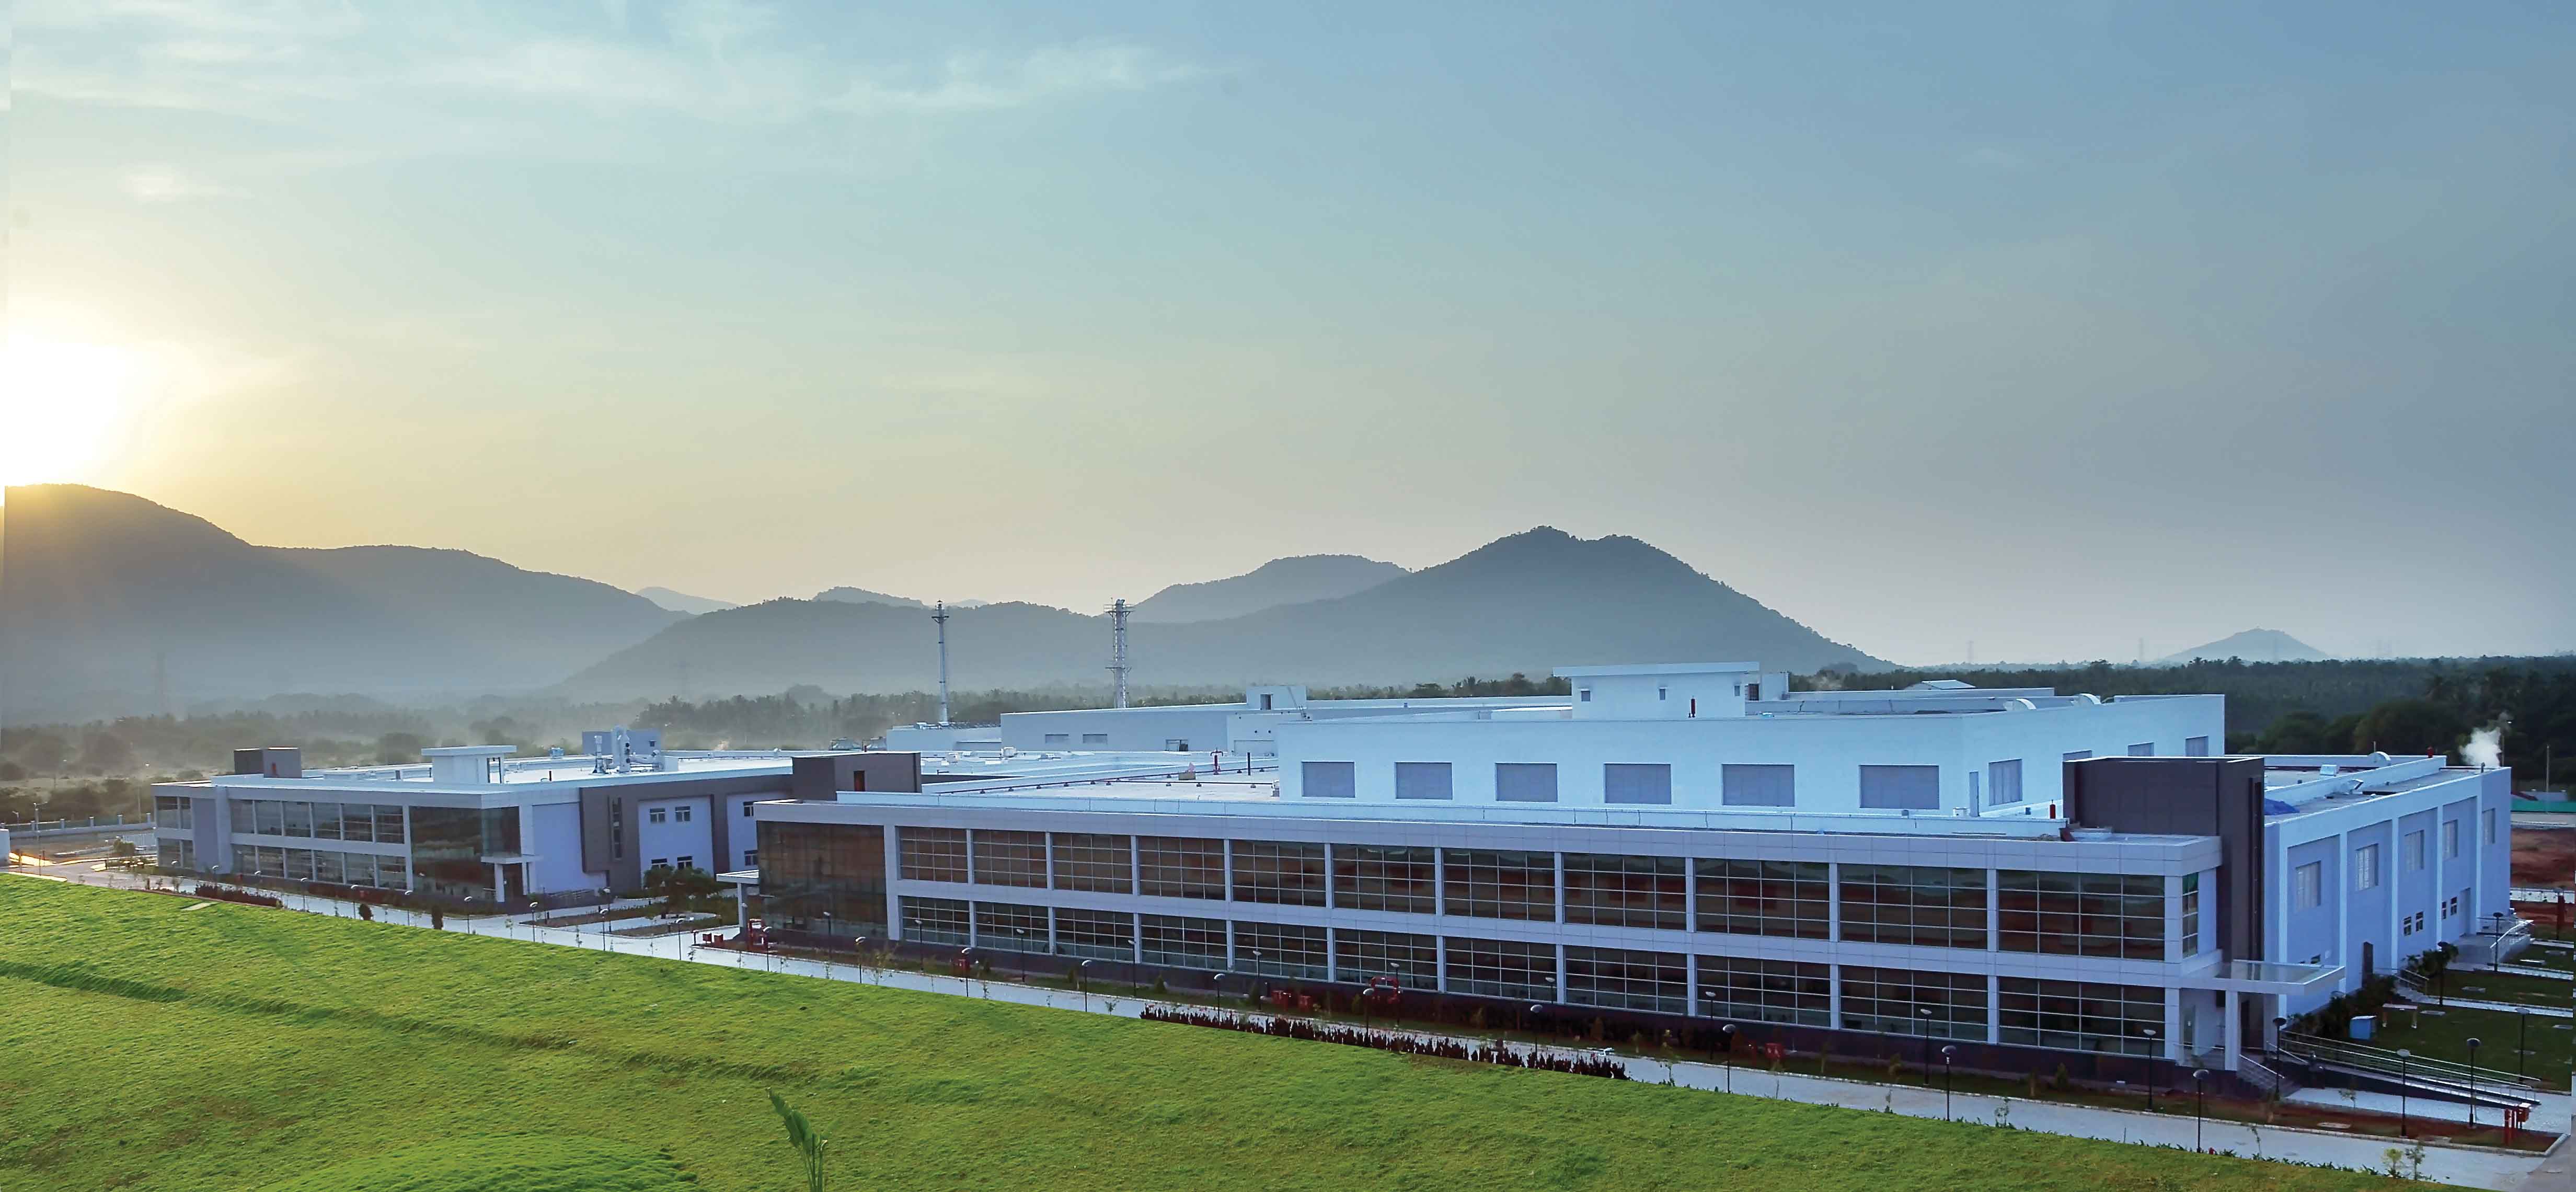 A manufacturing facility for nutrition supplements and beauty products